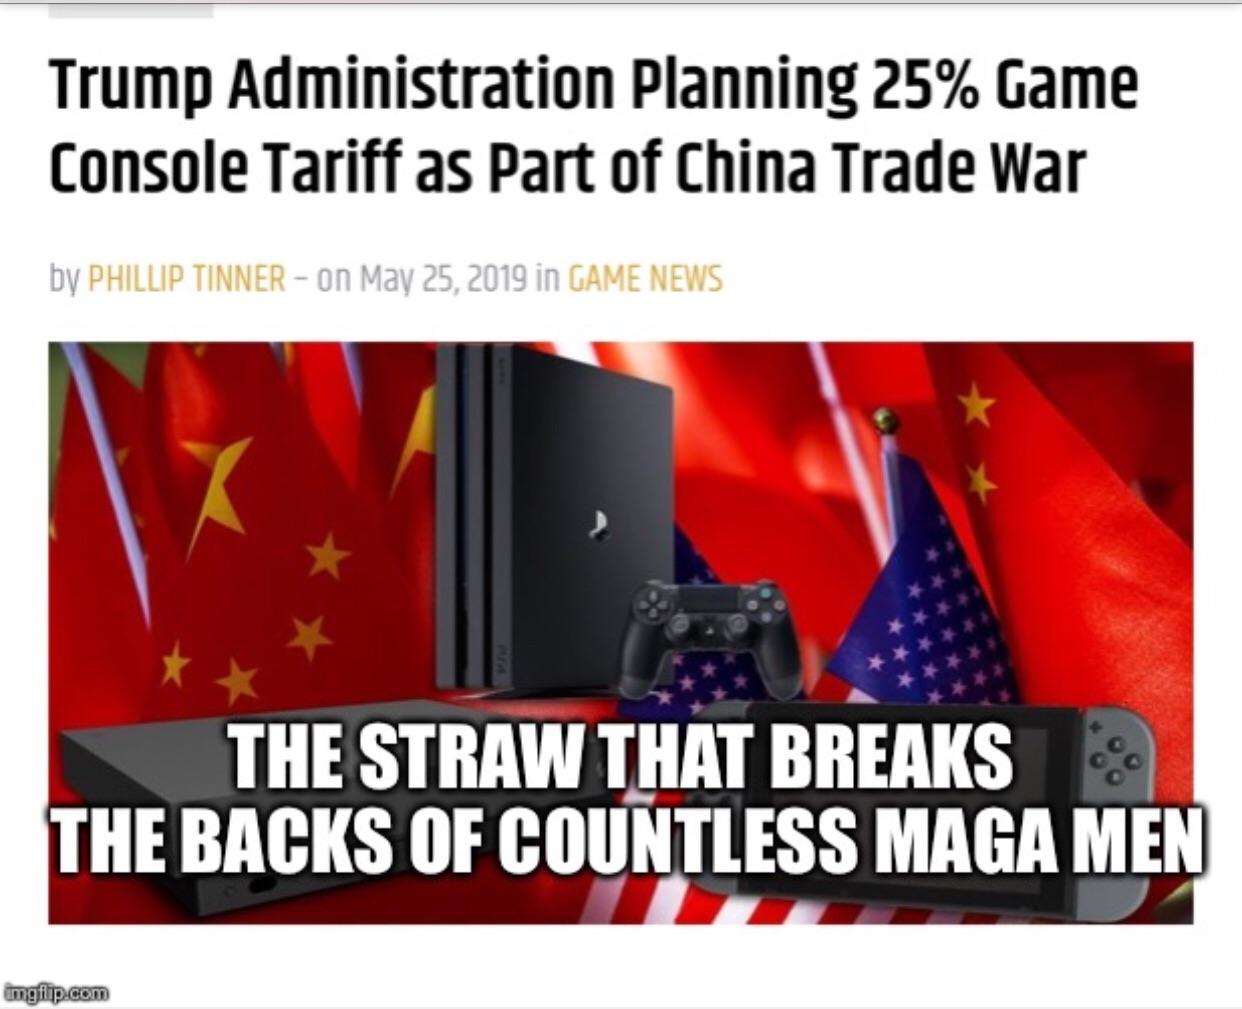 multimedia - Trump Administration Planning 25% Game Console Tariff as part of China Trade War by Phillip Tinner on in Game News The Straw That Breaks The Backs Of Countless Maga Men imgilip.com